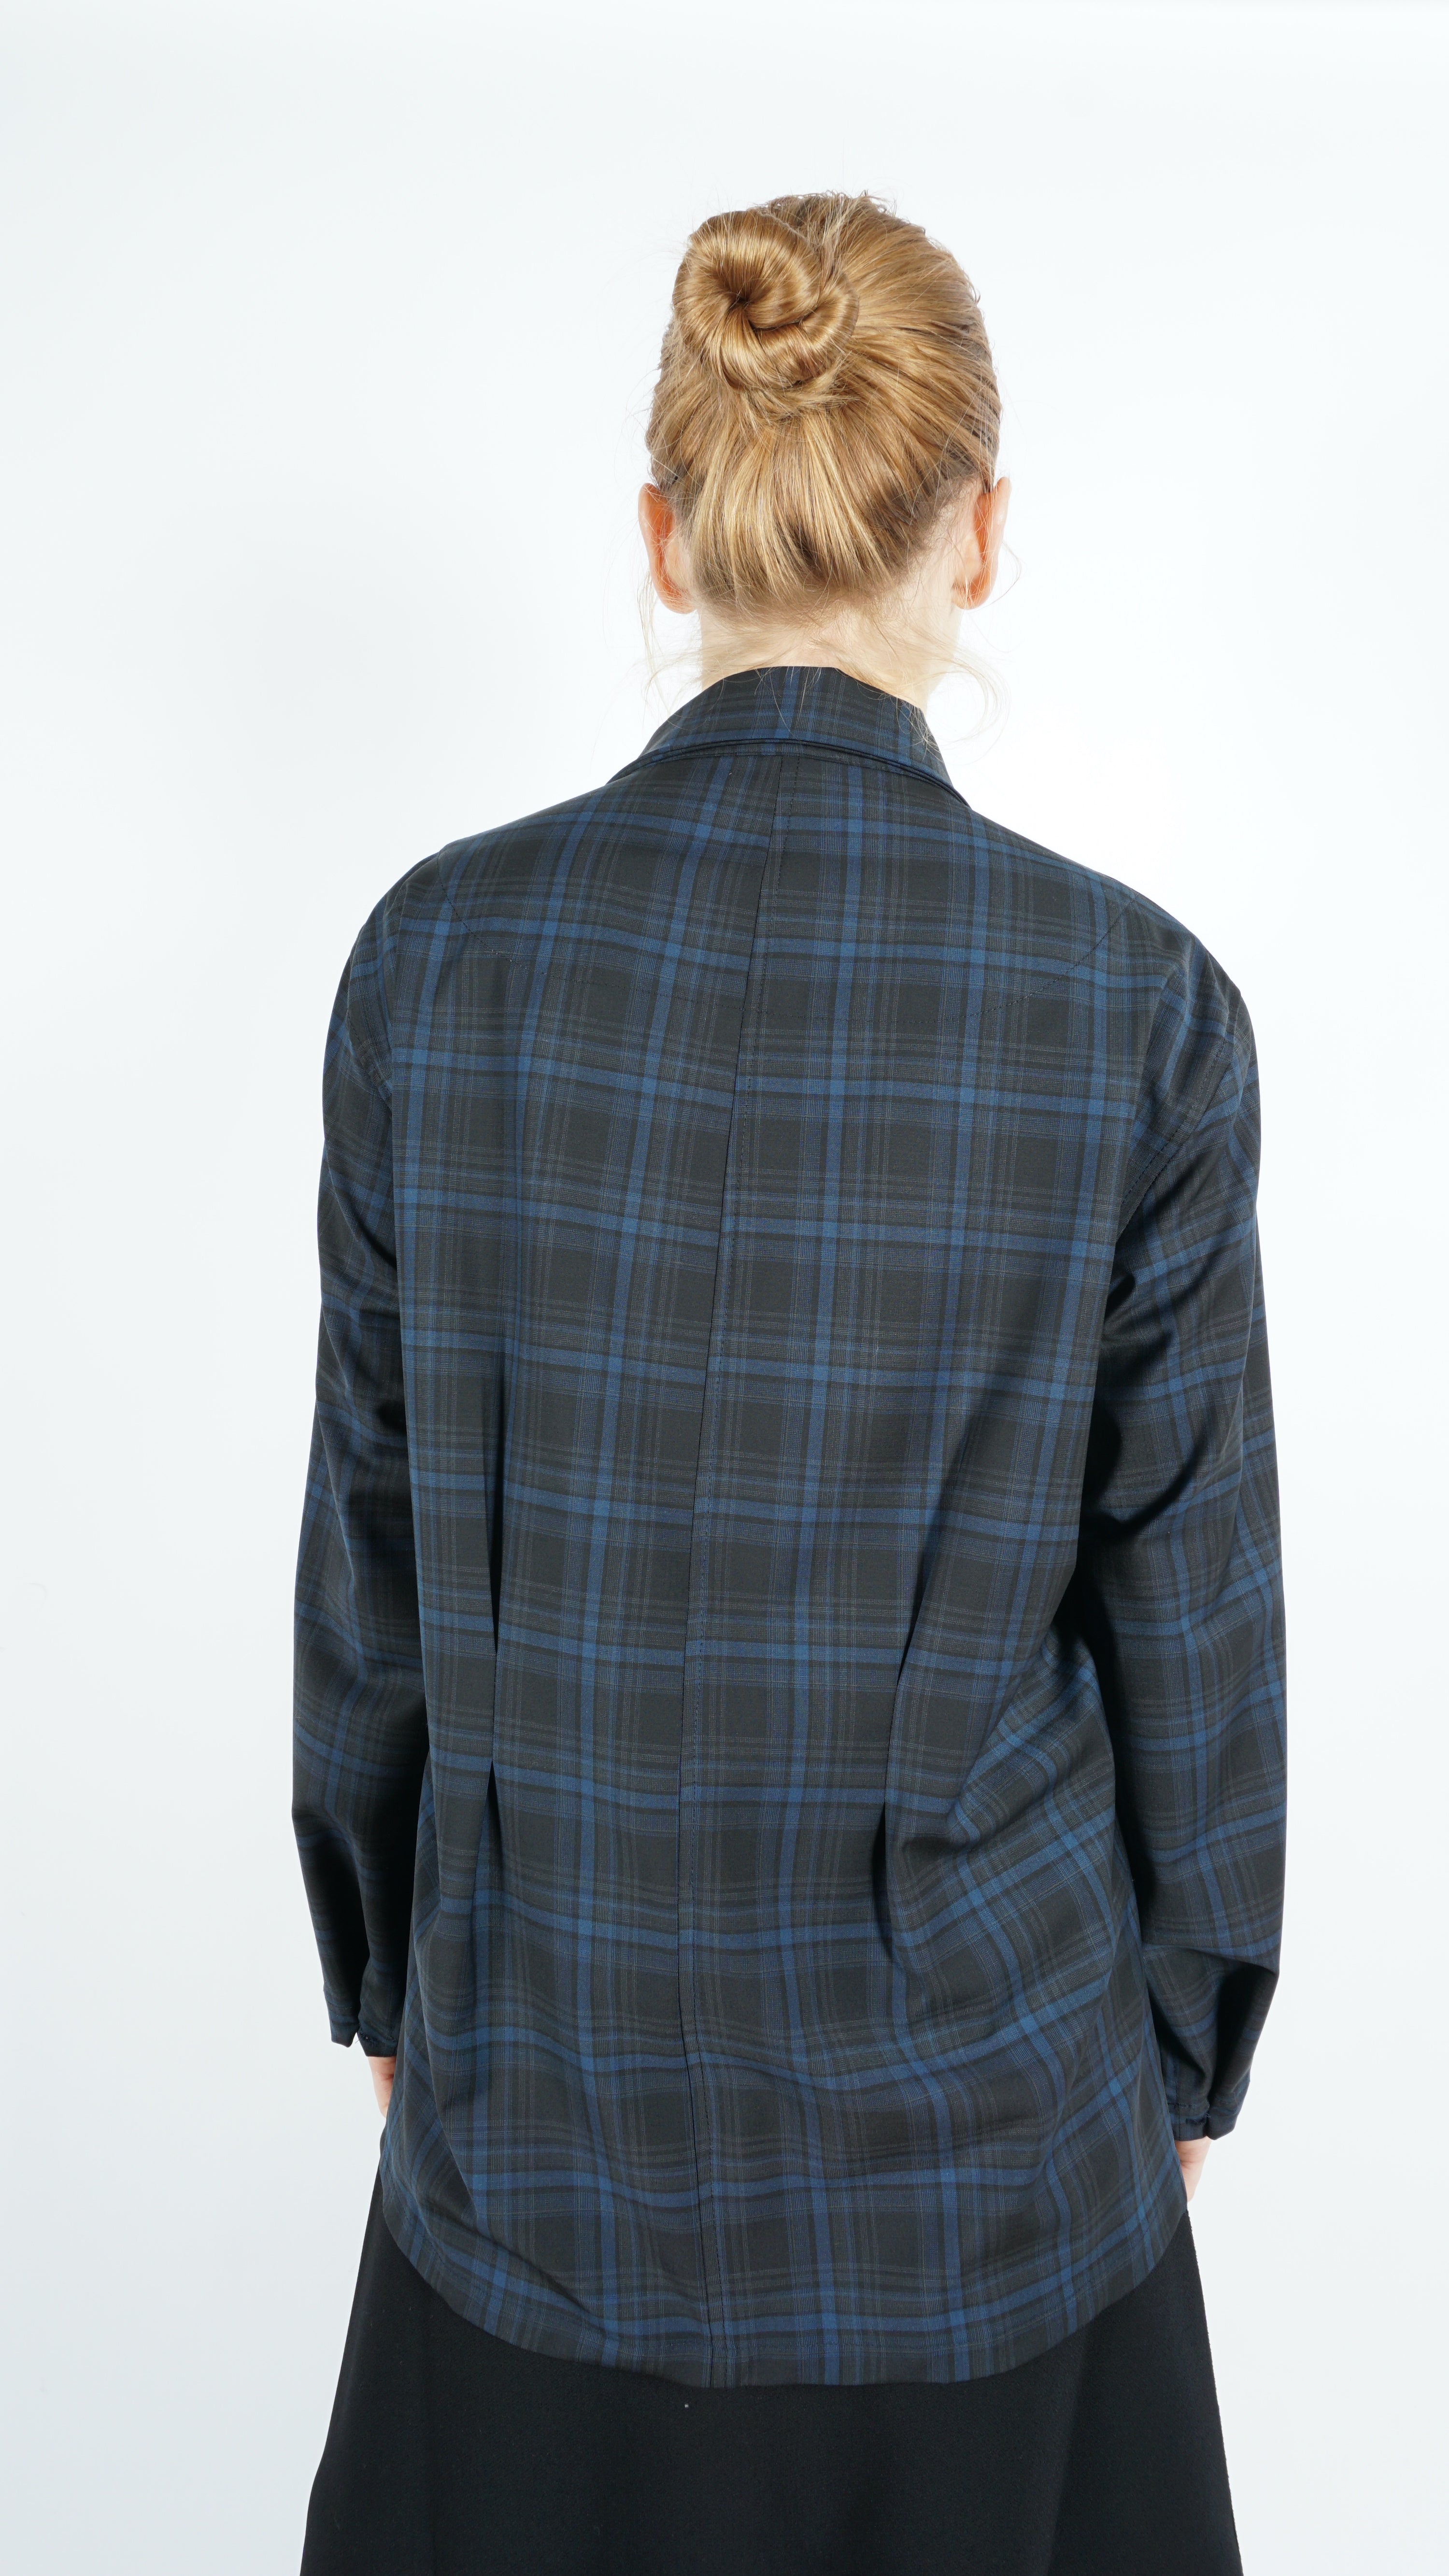 Checkered jacket by Christian L'enfant